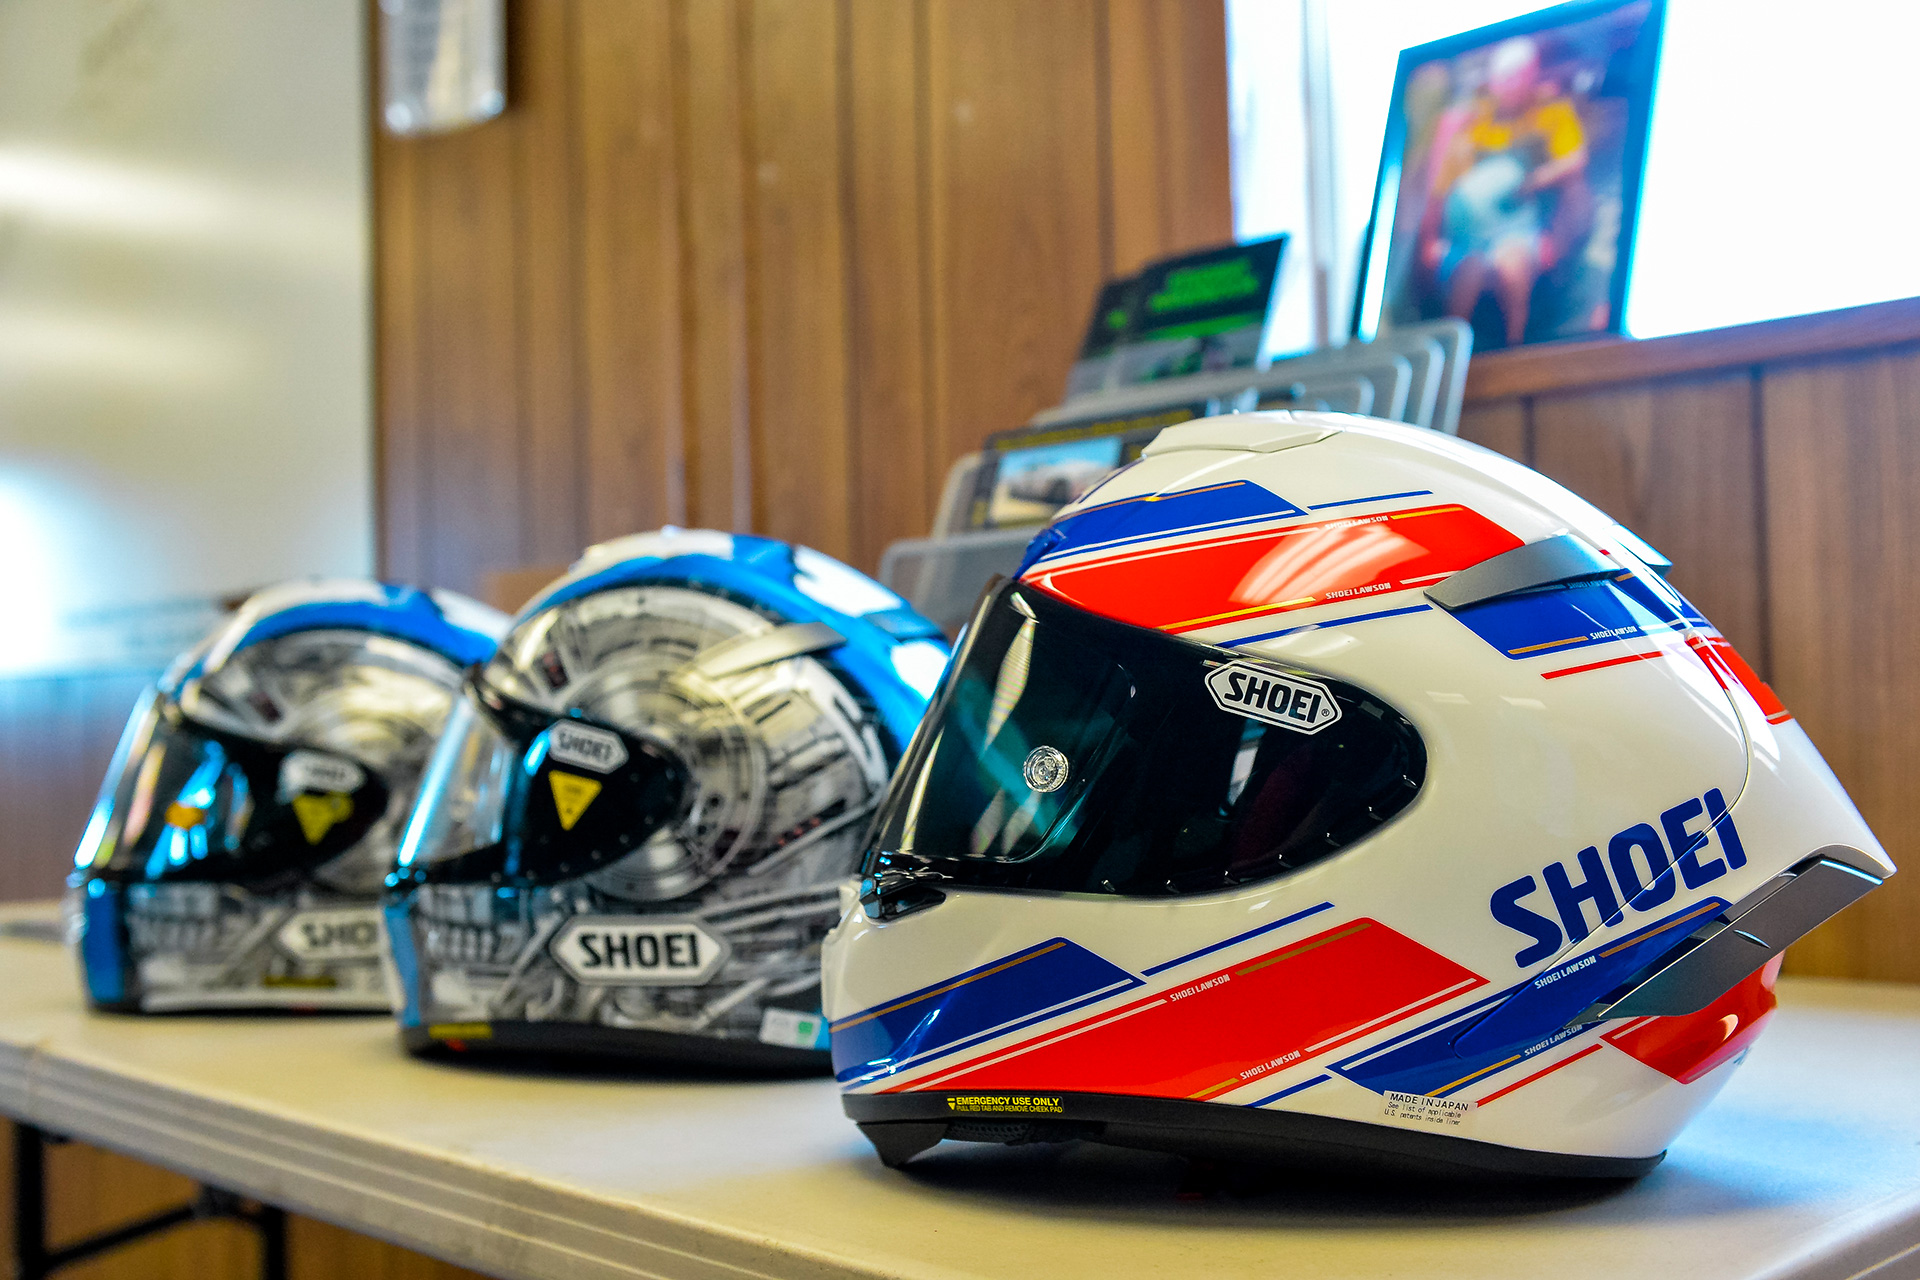 Shoei X-Fourteen Motorcycle Helmet EVALUATION, Gear Review | Cycle World